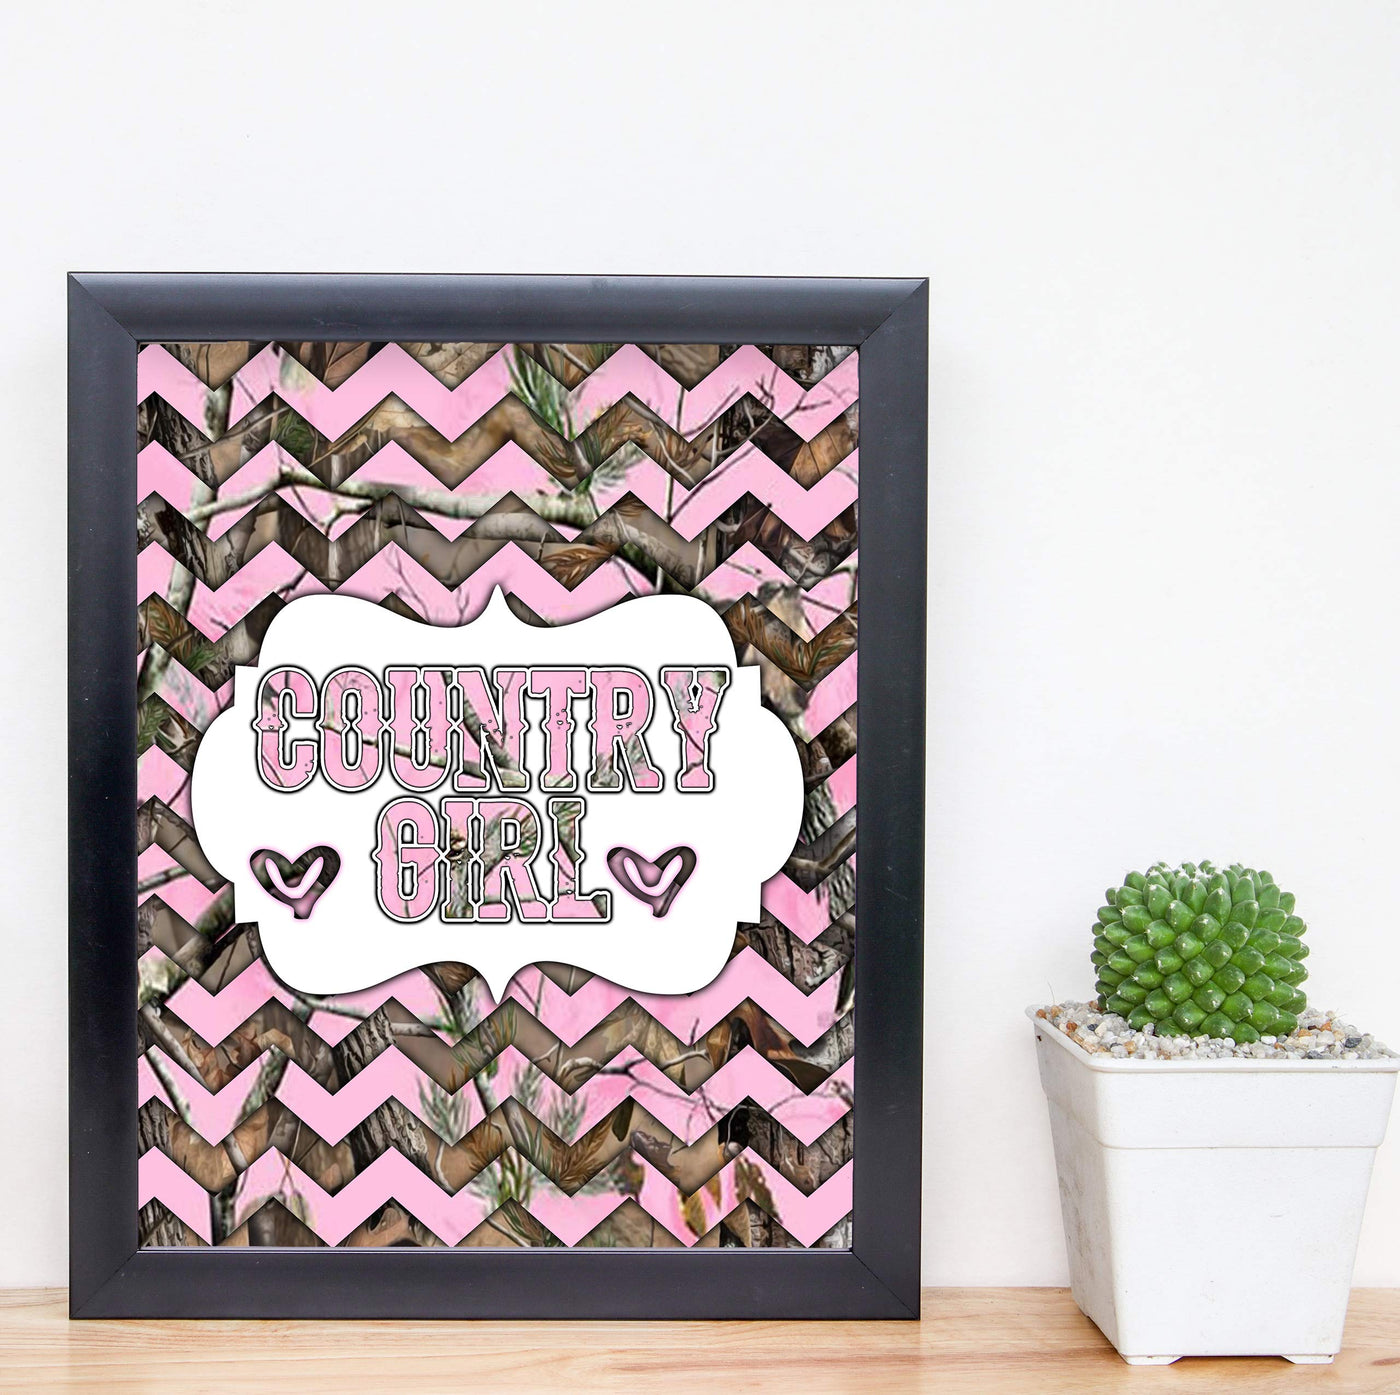 Country Girl -Rustic Inspirational Wall Art Sign -8 x 10" Western Chevron Pink Camo Print -Ready to Frame. Chic Decoration for Home-Office-Farmhouse-Dorm Decor. Cute Gift for All Southern Girls!